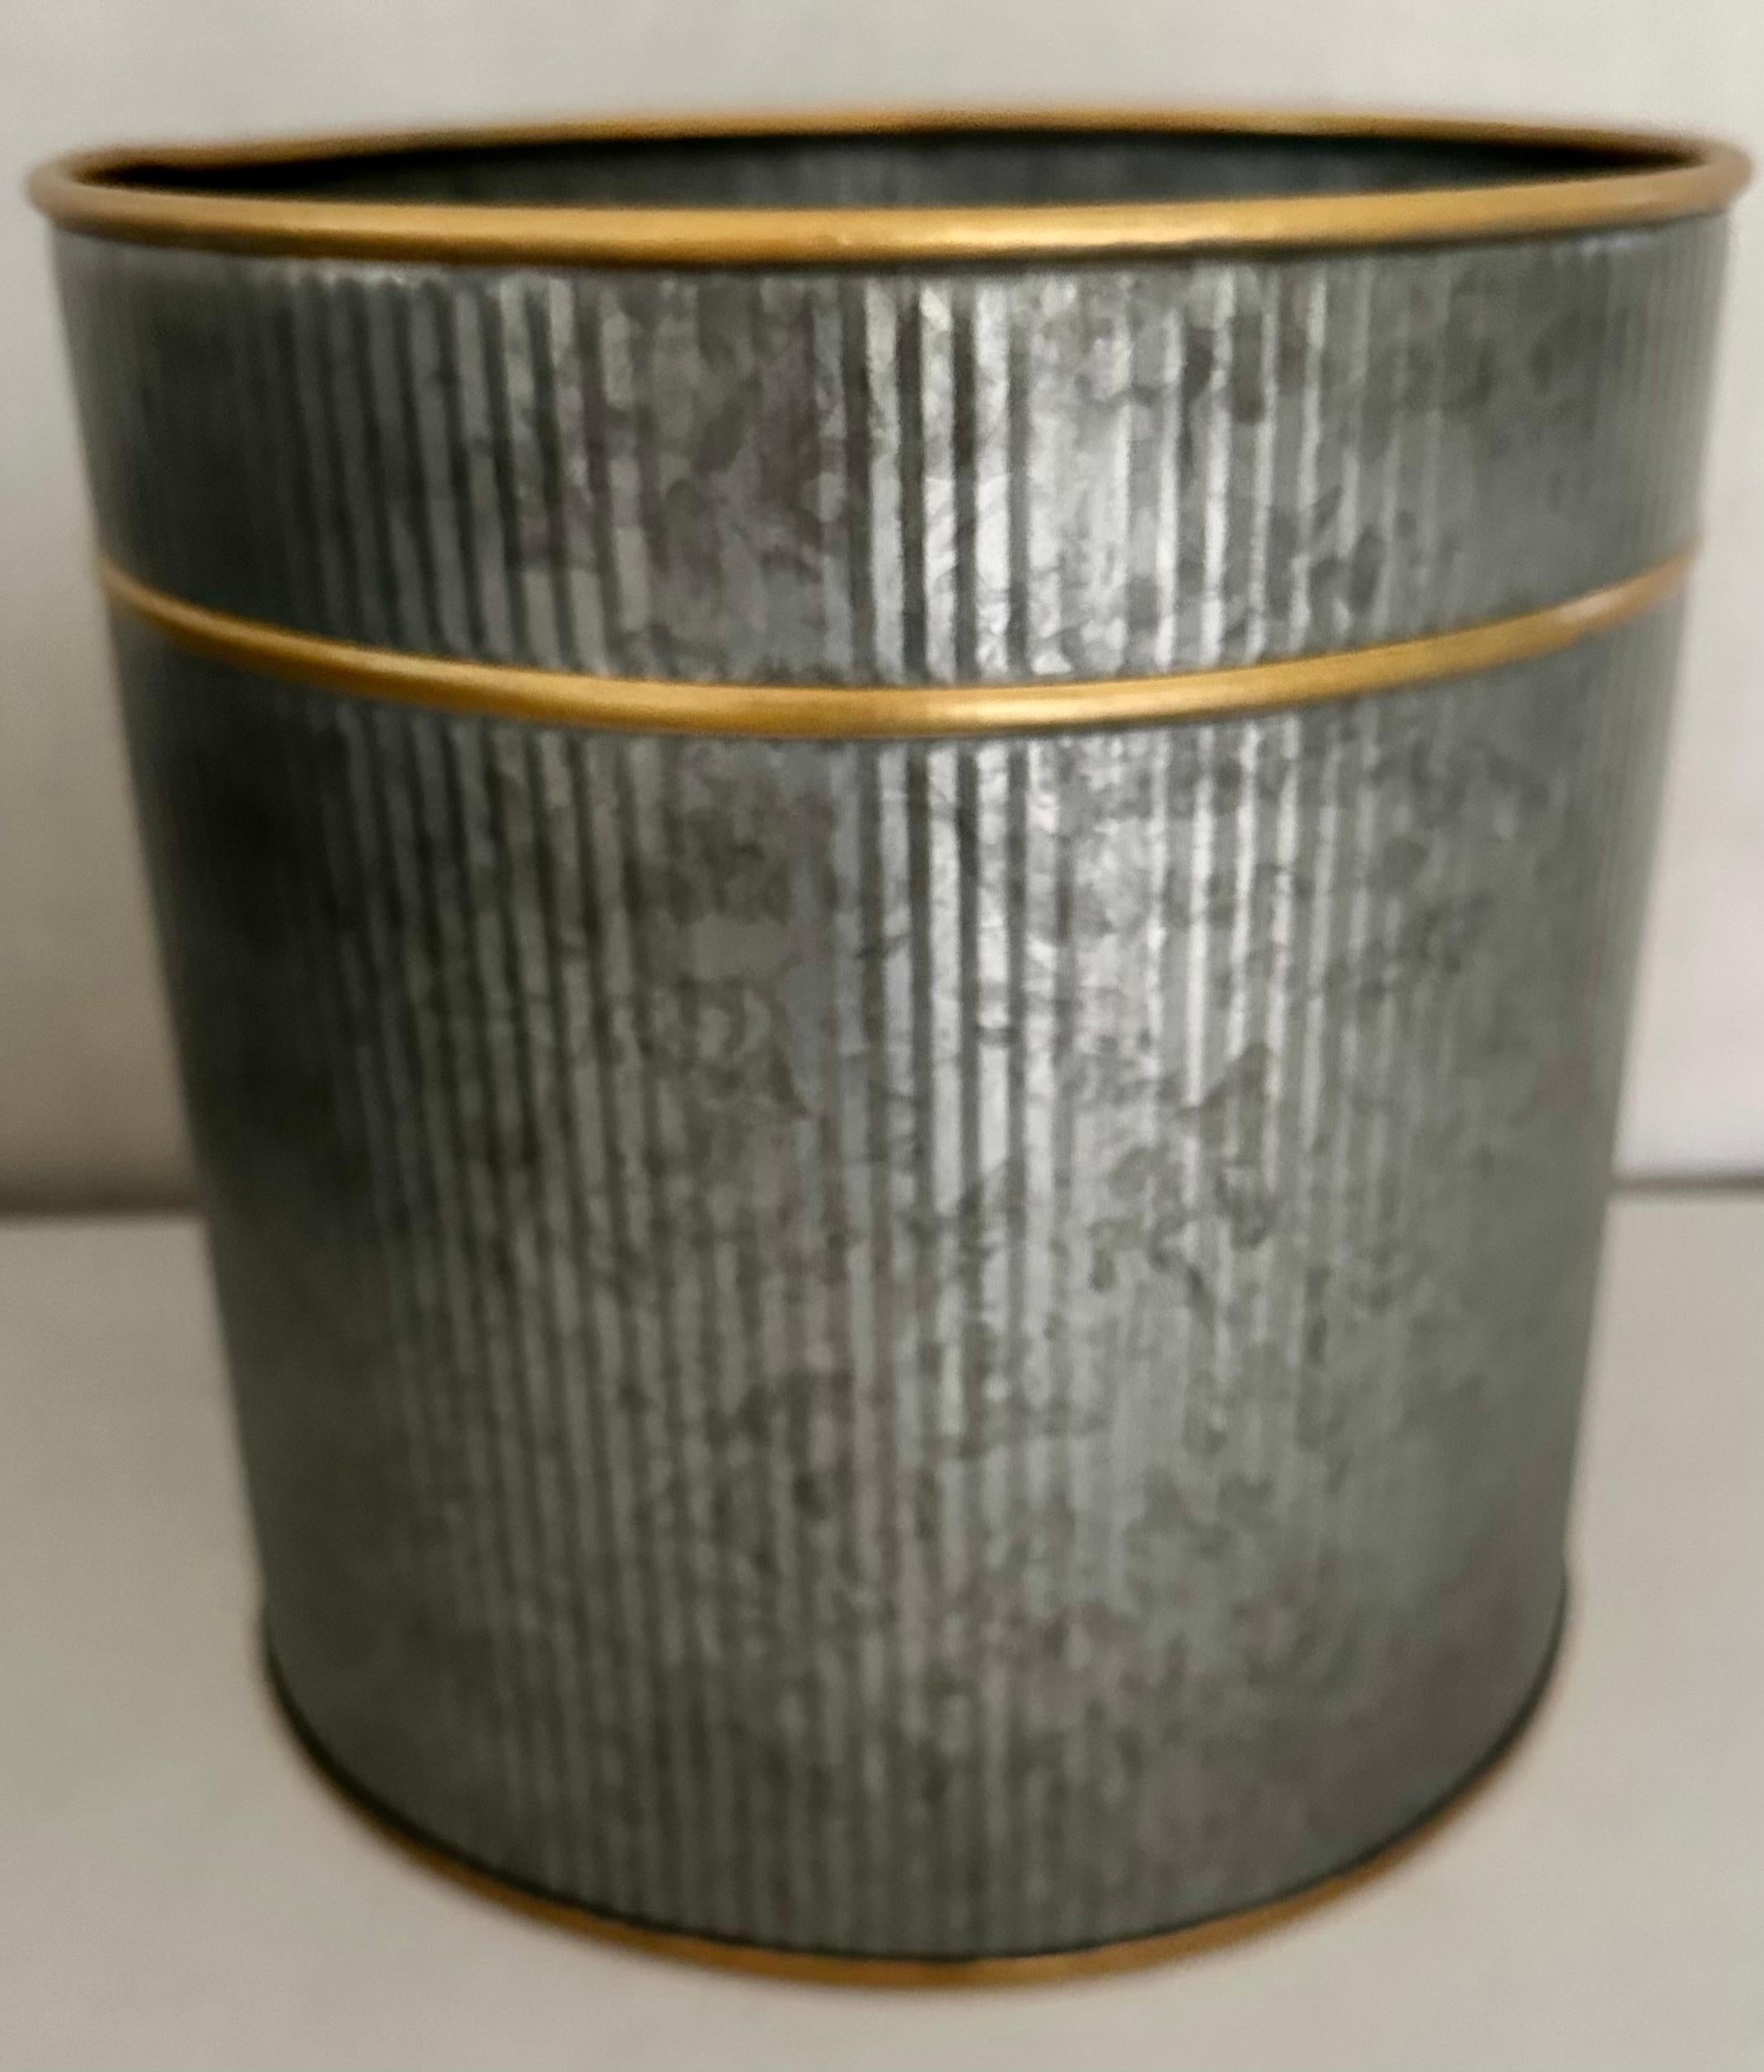 Hollywood Regency Style Metal Waste Basket with Gilt Accent For Sale 1